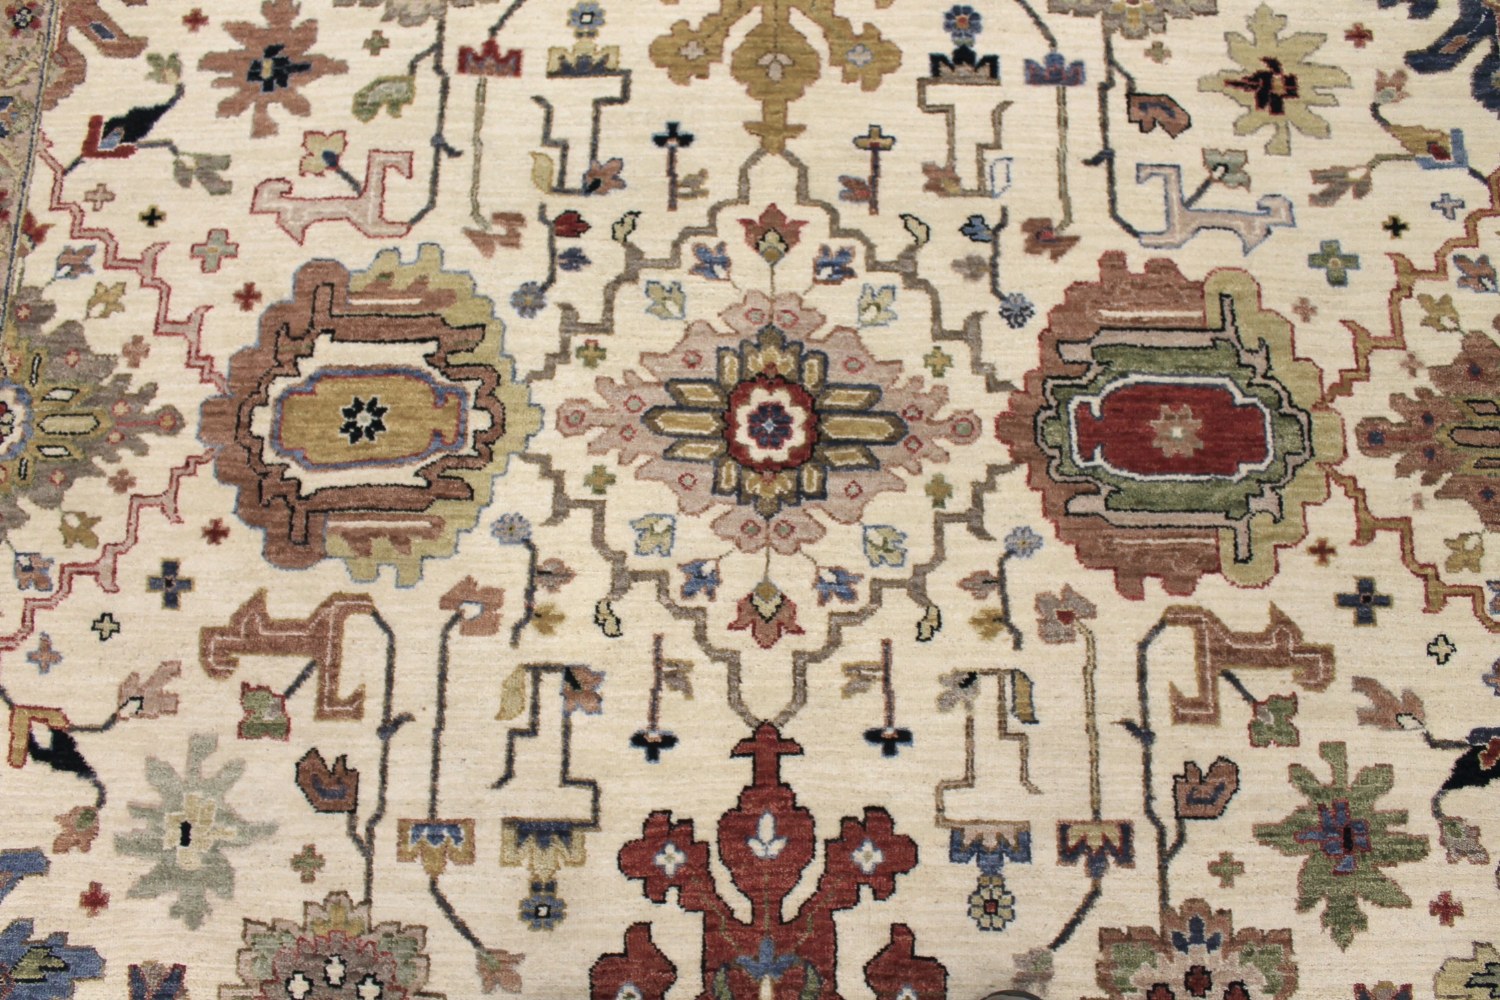 8x10 Traditional Hand Knotted Wool Area Rug - MR028697